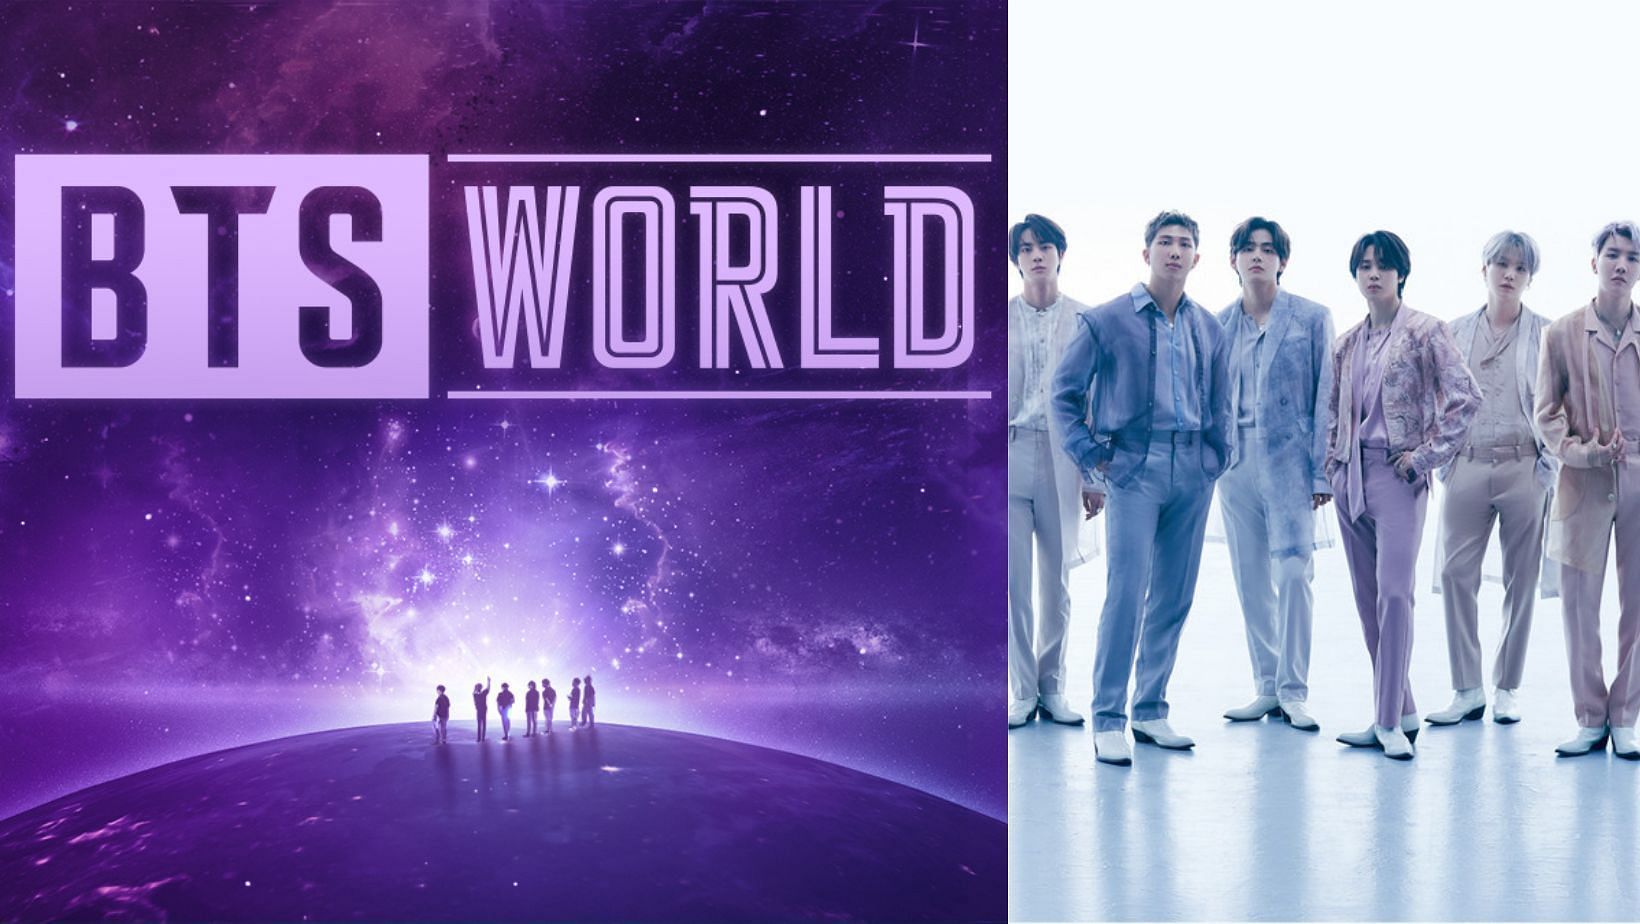 &ldquo;The end of an era&rdquo;: Fans distraught by the news of Netmarble&rsquo;s decision of shutting down the BTS World game (Images via Twitter)